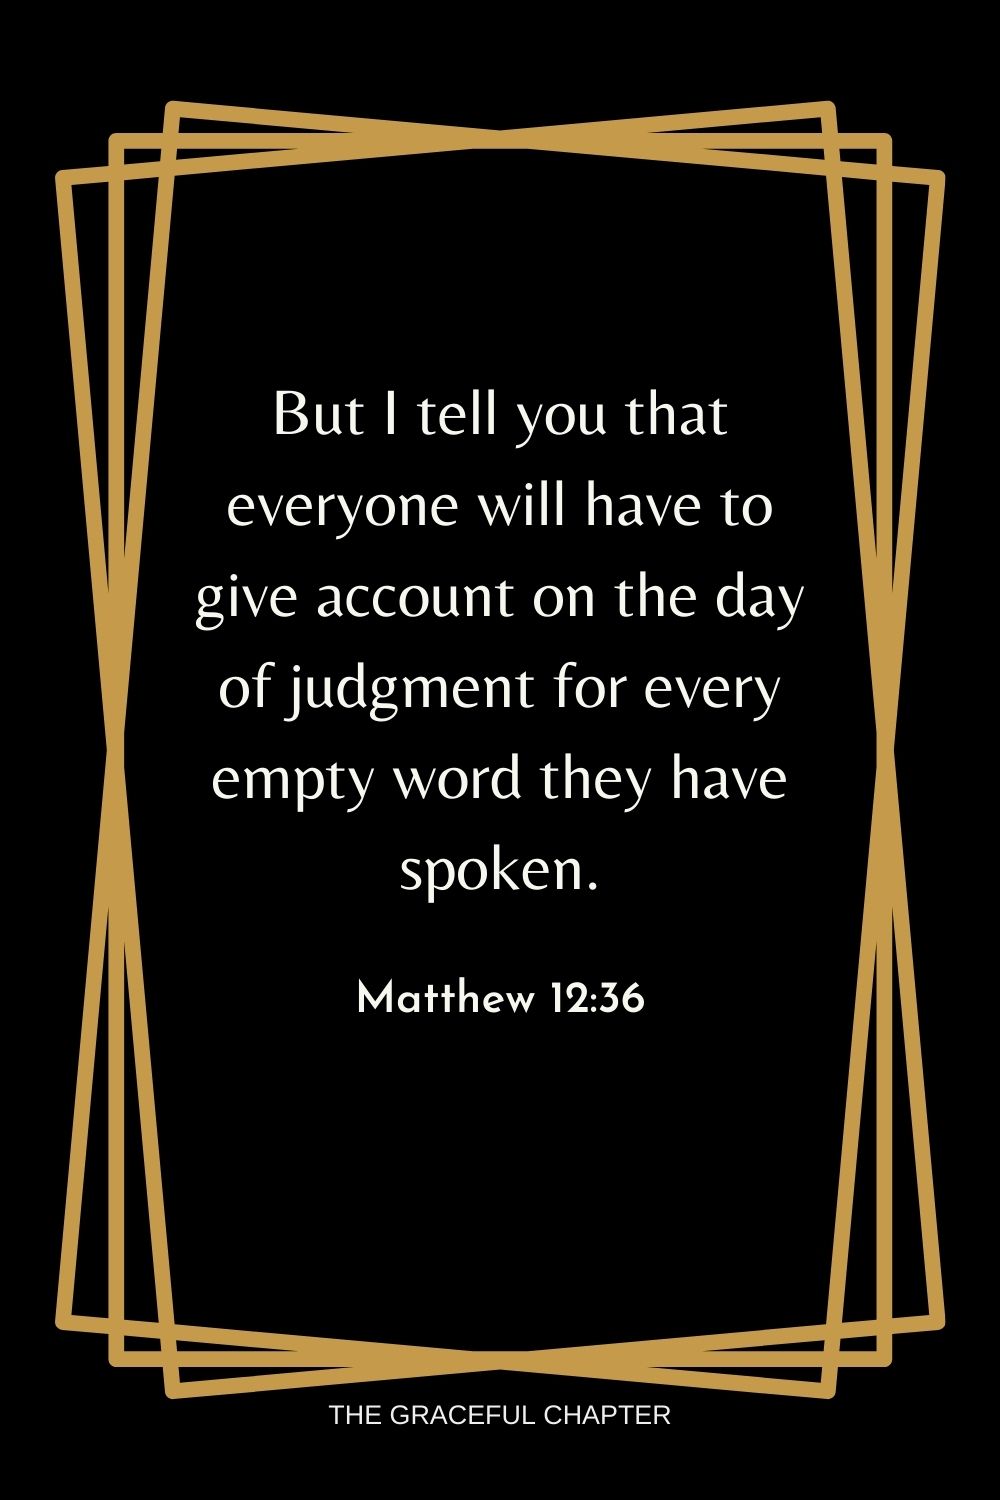 But I tell you that everyone will have to give account on the day of judgment for every empty word they have spoken. Matthew 12:36